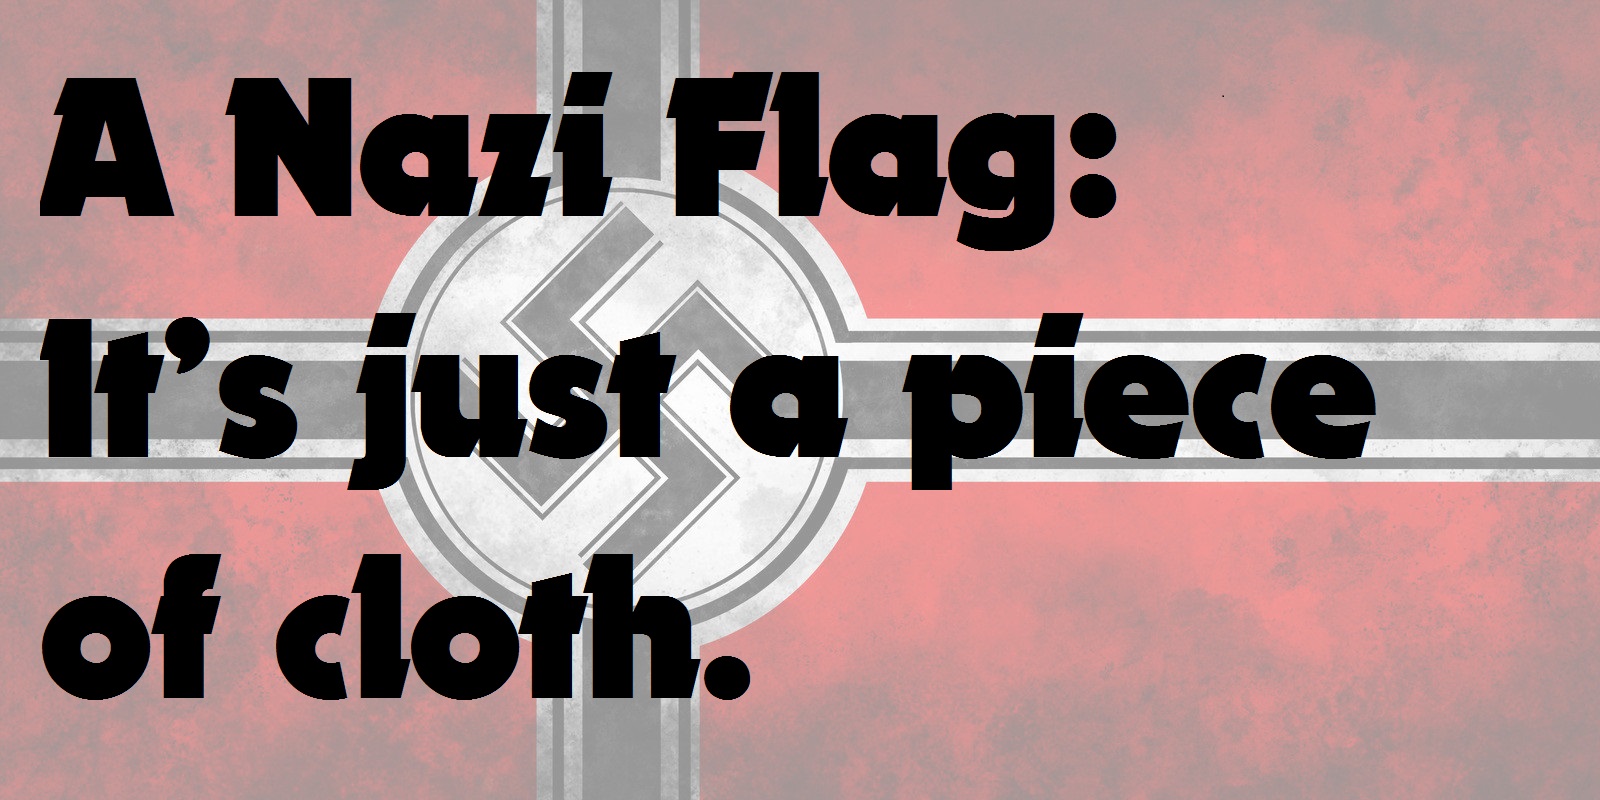 A Nazi Flag: It’s just a piece of cloth.